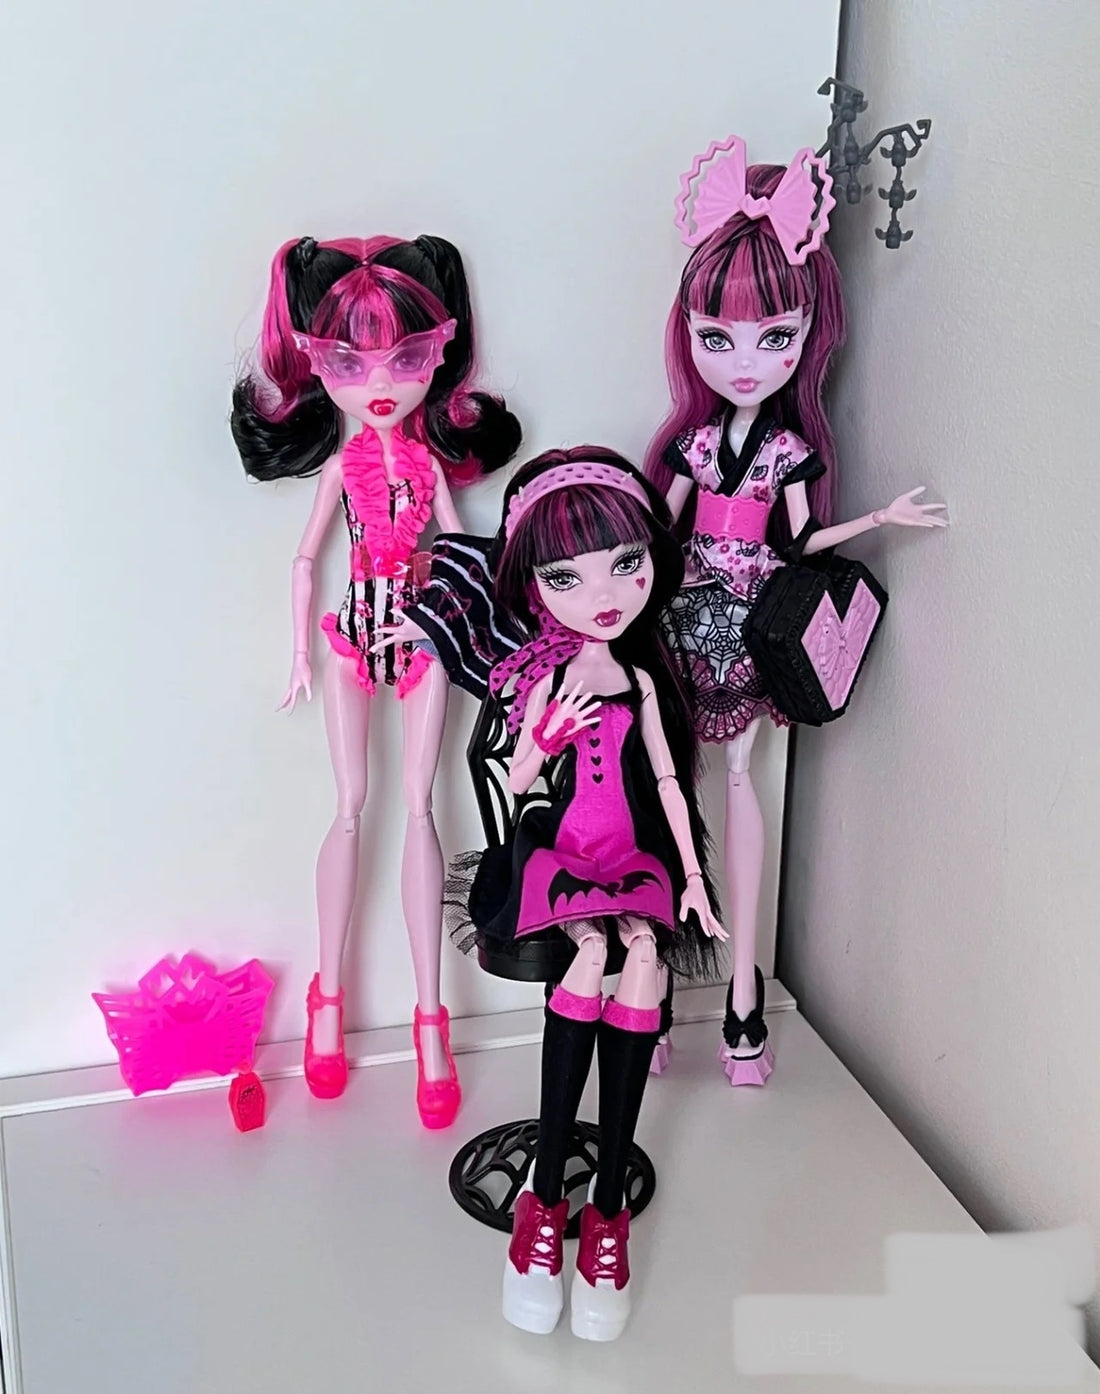 ABOUT MONSTER HIGH